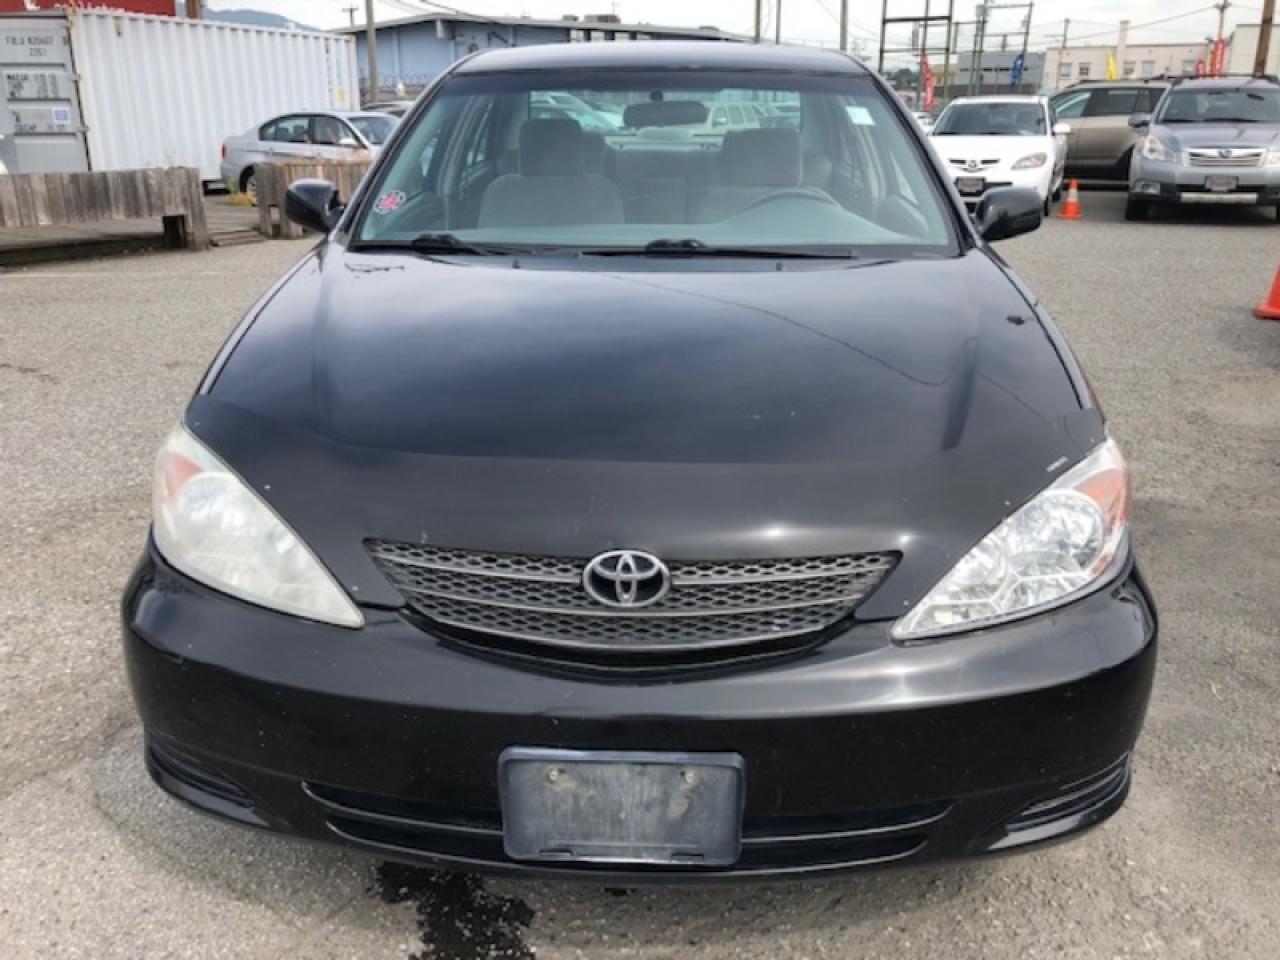 Used 2004 Toyota Camry For Sale In Vancouver British Columbia